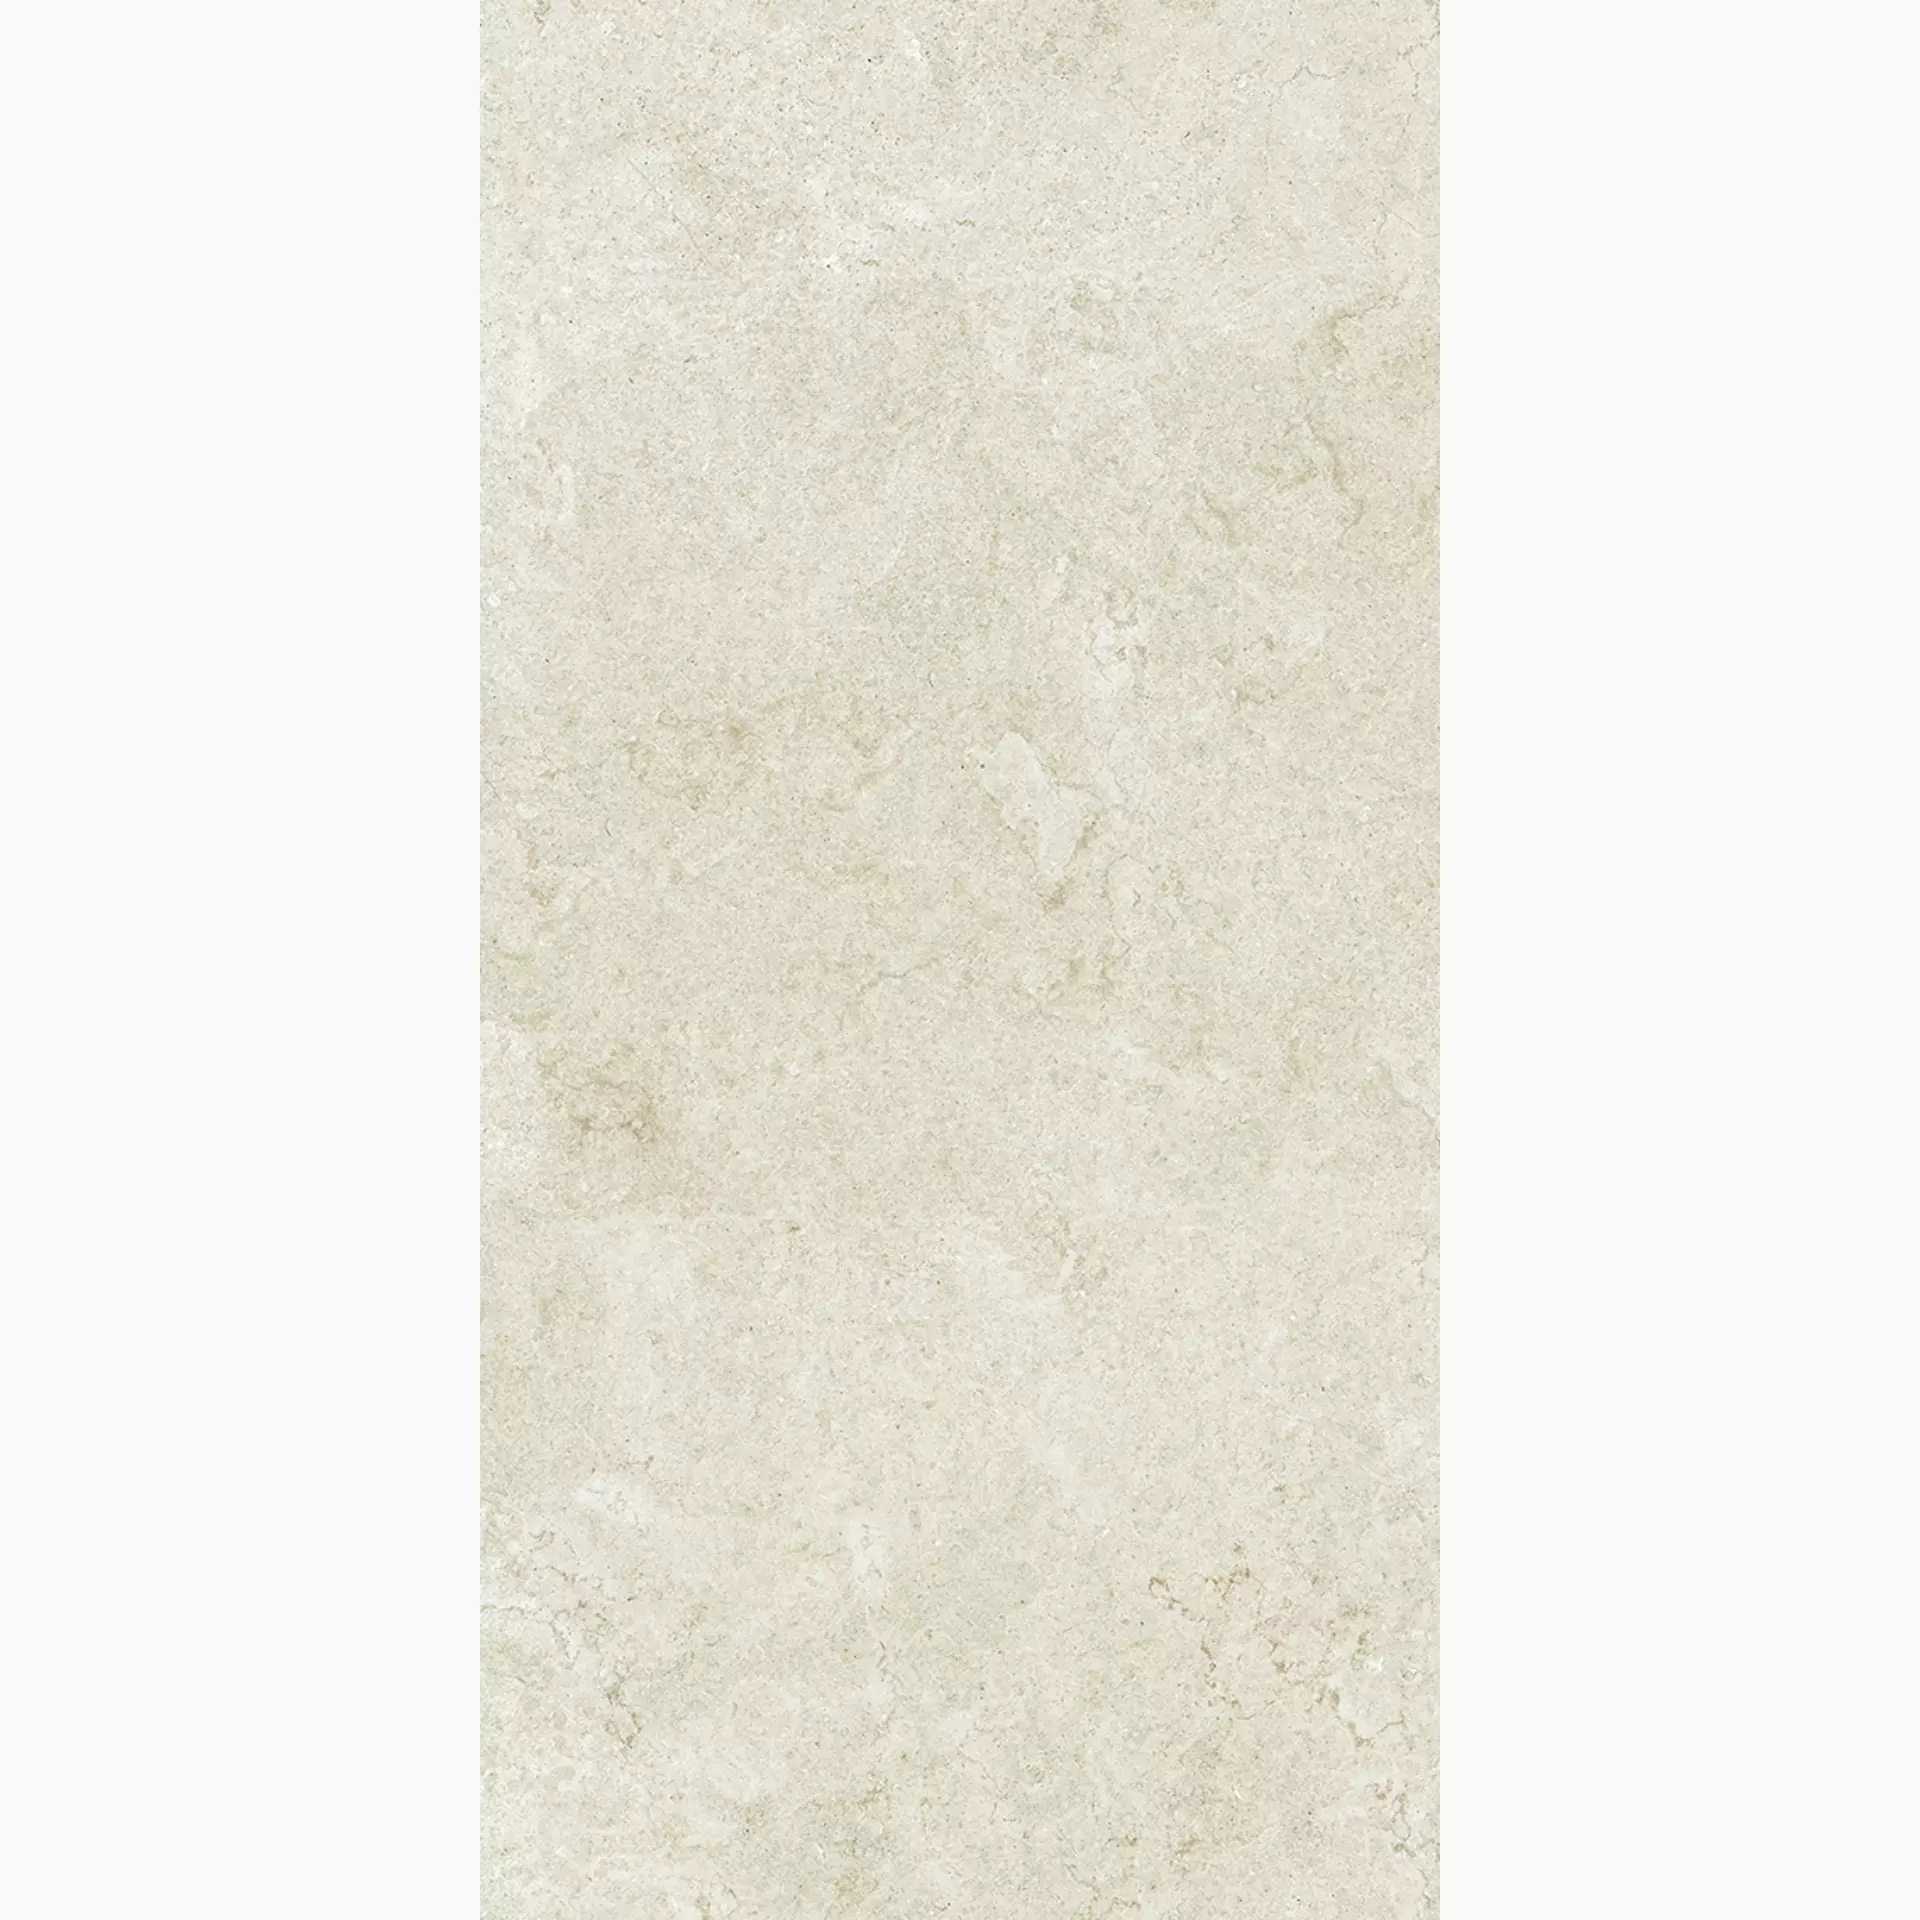 Margres Slabstone White Natural Antibacterial B25510LSL1PBF 50x100cm rectified 3,5mm